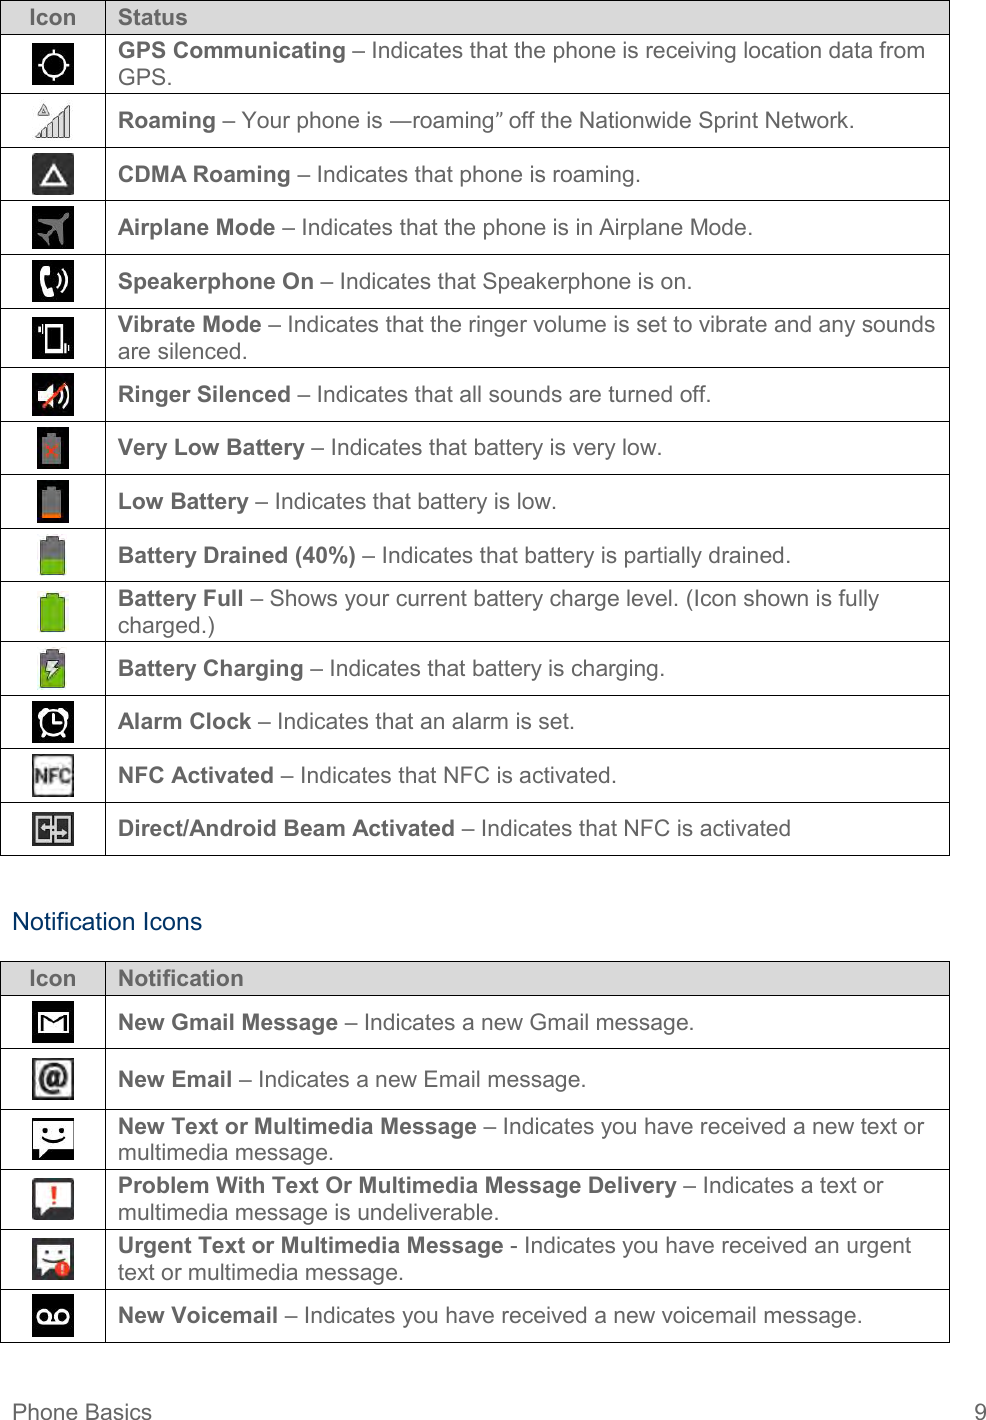 Phone Basics  9 Icon Status  GPS Communicating – Indicates that the phone is receiving location data from GPS.  Roaming – Your phone is ―roaming” off the Nationwide Sprint Network.  CDMA Roaming – Indicates that phone is roaming.  Airplane Mode – Indicates that the phone is in Airplane Mode.  Speakerphone On – Indicates that Speakerphone is on.   Vibrate Mode – Indicates that the ringer volume is set to vibrate and any sounds are silenced.   Ringer Silenced – Indicates that all sounds are turned off.   Very Low Battery – Indicates that battery is very low.   Low Battery – Indicates that battery is low.   Battery Drained (40%) – Indicates that battery is partially drained.   Battery Full – Shows your current battery charge level. (Icon shown is fully charged.)   Battery Charging – Indicates that battery is charging.   Alarm Clock – Indicates that an alarm is set.   NFC Activated – Indicates that NFC is activated.   Direct/Android Beam Activated – Indicates that NFC is activated  Notification Icons Icon Notification  New Gmail Message – Indicates a new Gmail message.   New Email – Indicates a new Email message.   New Text or Multimedia Message – Indicates you have received a new text or multimedia message.   Problem With Text Or Multimedia Message Delivery – Indicates a text or multimedia message is undeliverable.   Urgent Text or Multimedia Message - Indicates you have received an urgent text or multimedia message.   New Voicemail – Indicates you have received a new voicemail message.  